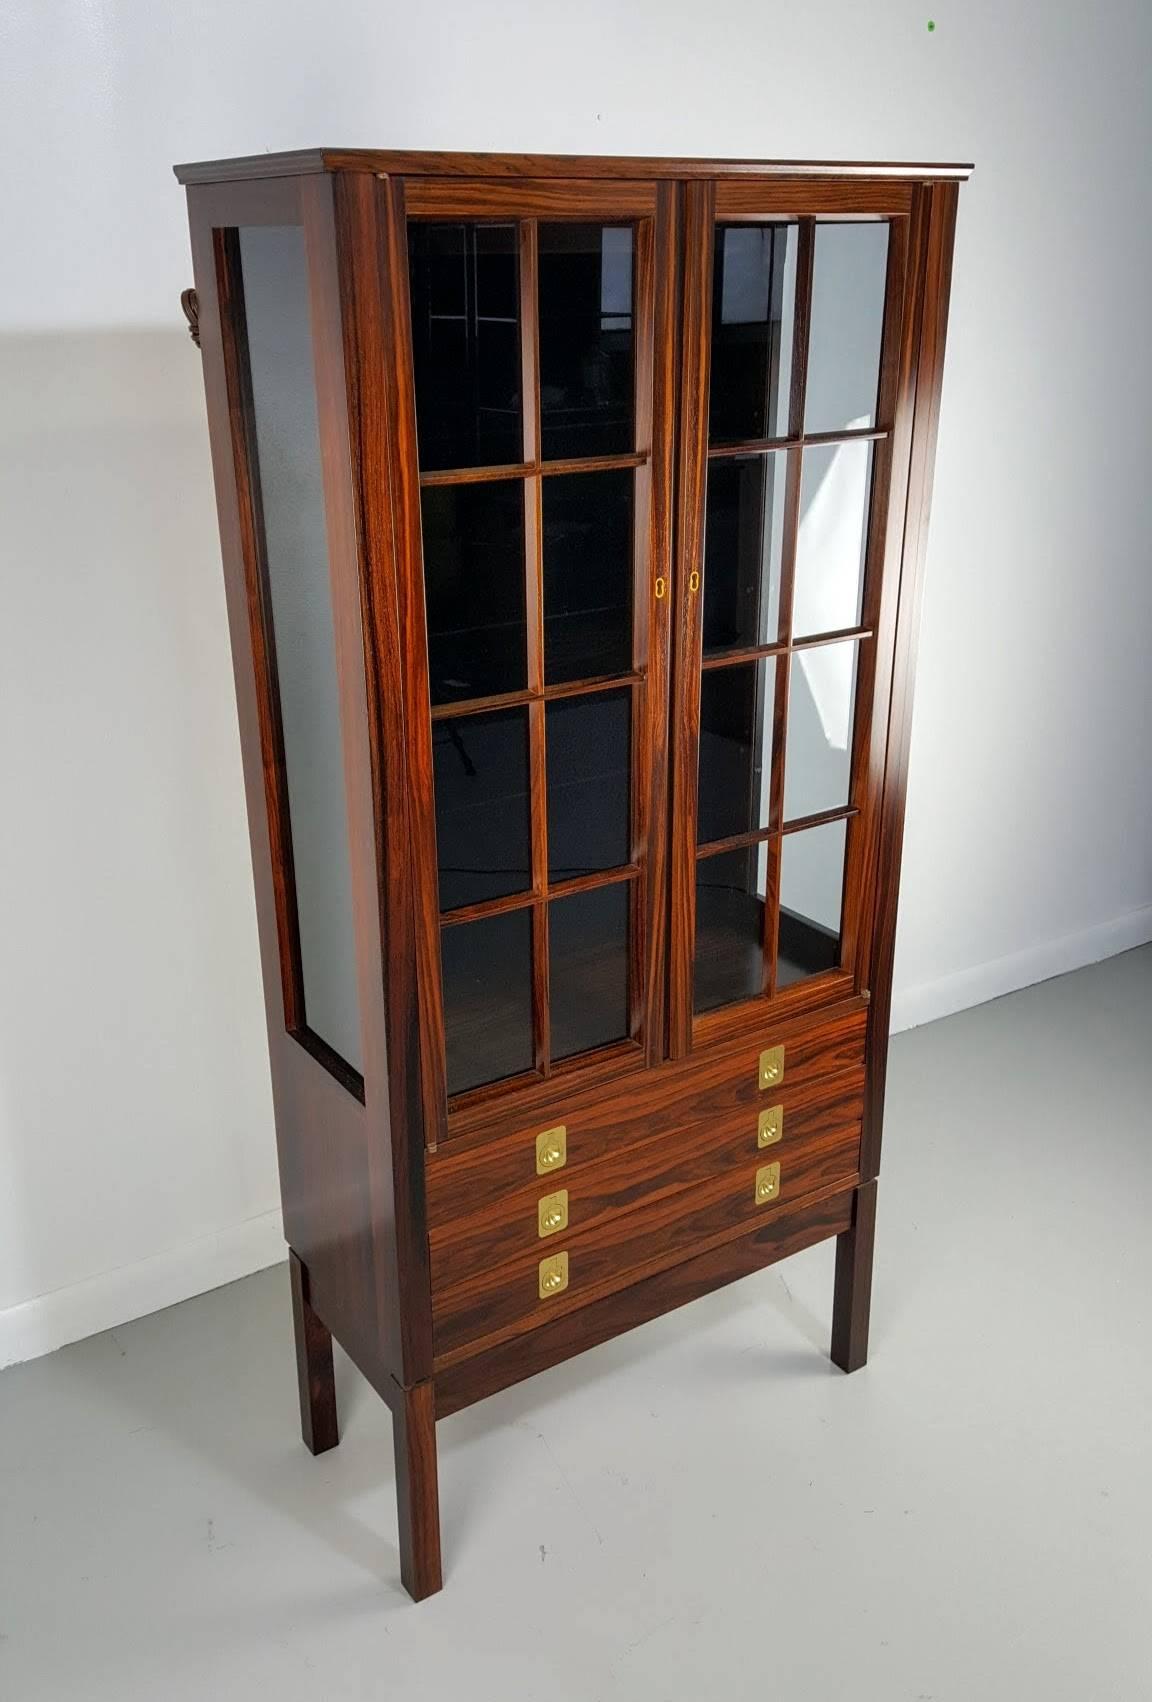 Rosewood lighted curio cabinet by Torbjørn Afdal, Norway, 1960s. Manufactured by Bruksbo. Excellent example of Classic Danish Modern / Scandinavian design. Exceptional rosewood grain throughout. Excellent condition.
